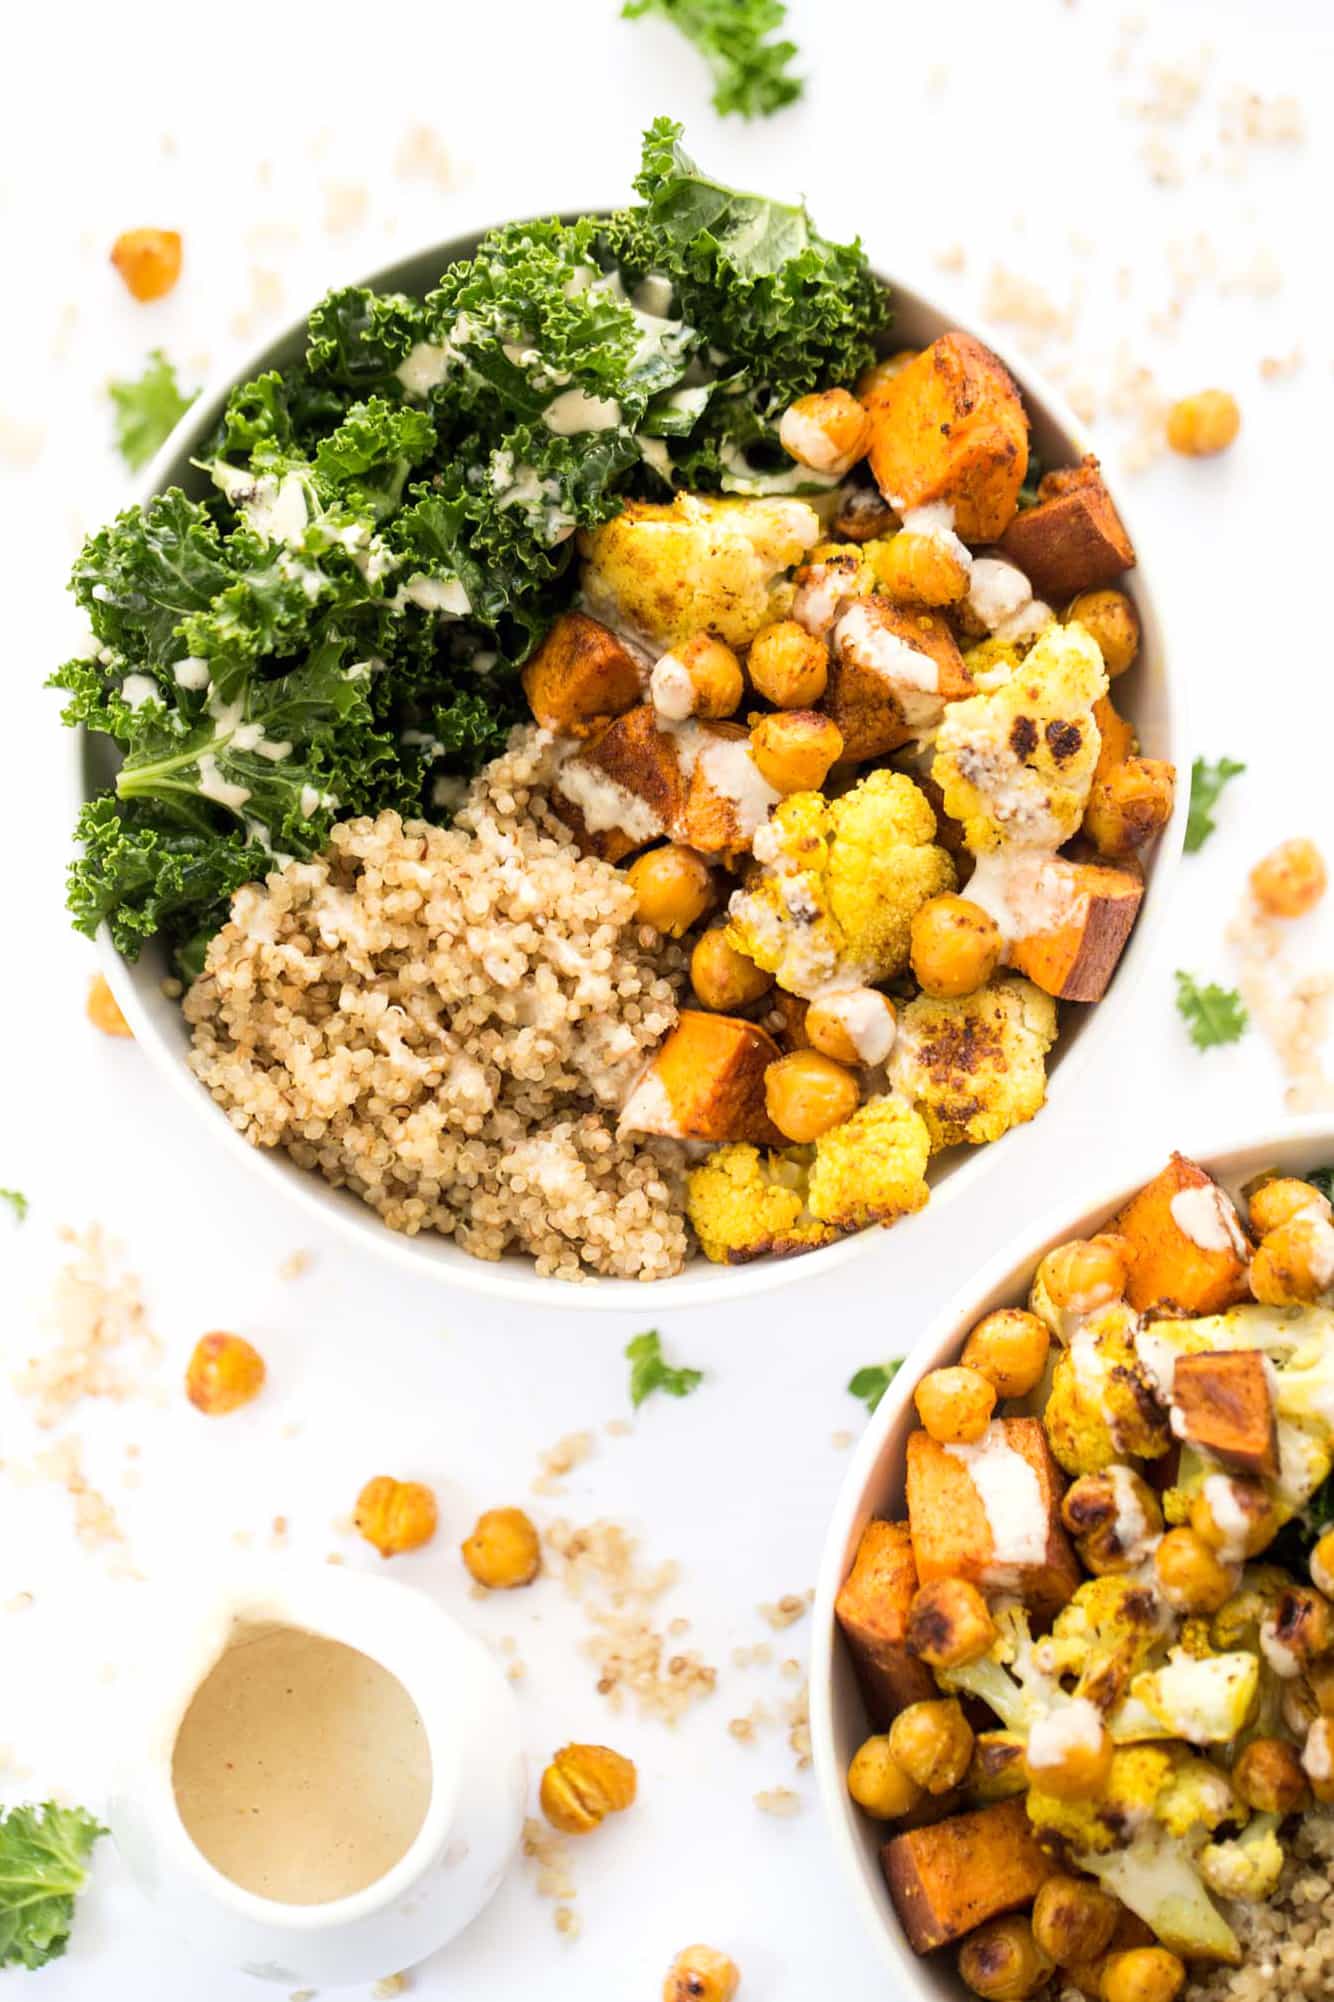 These HEALTHY curry roasted vegetable quinoa bowls are the perfect meal - easy to make, packed with protein and filled with amazing veggies!